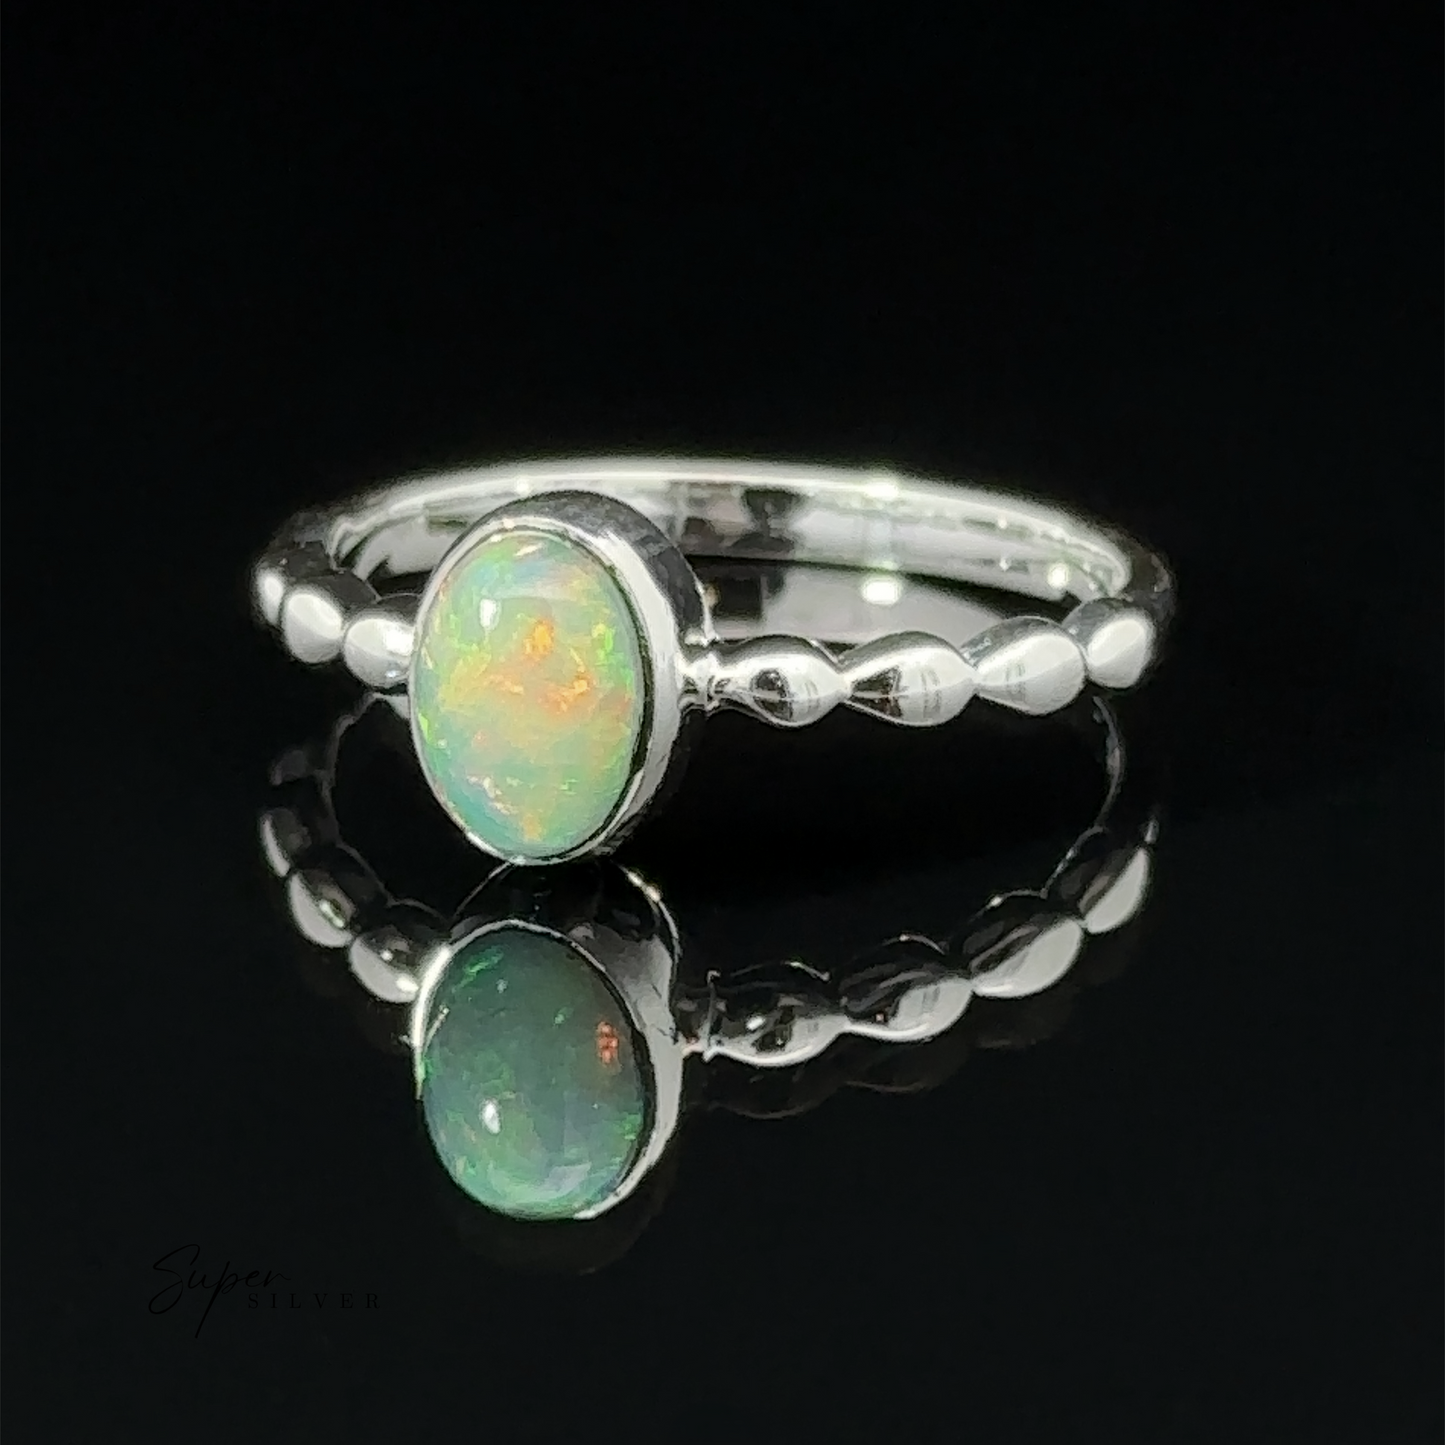 
                  
                    Oval Gemstone Ring with Beaded Band with an oval opal stone, displayed on a reflective surface against a dark background.
                  
                